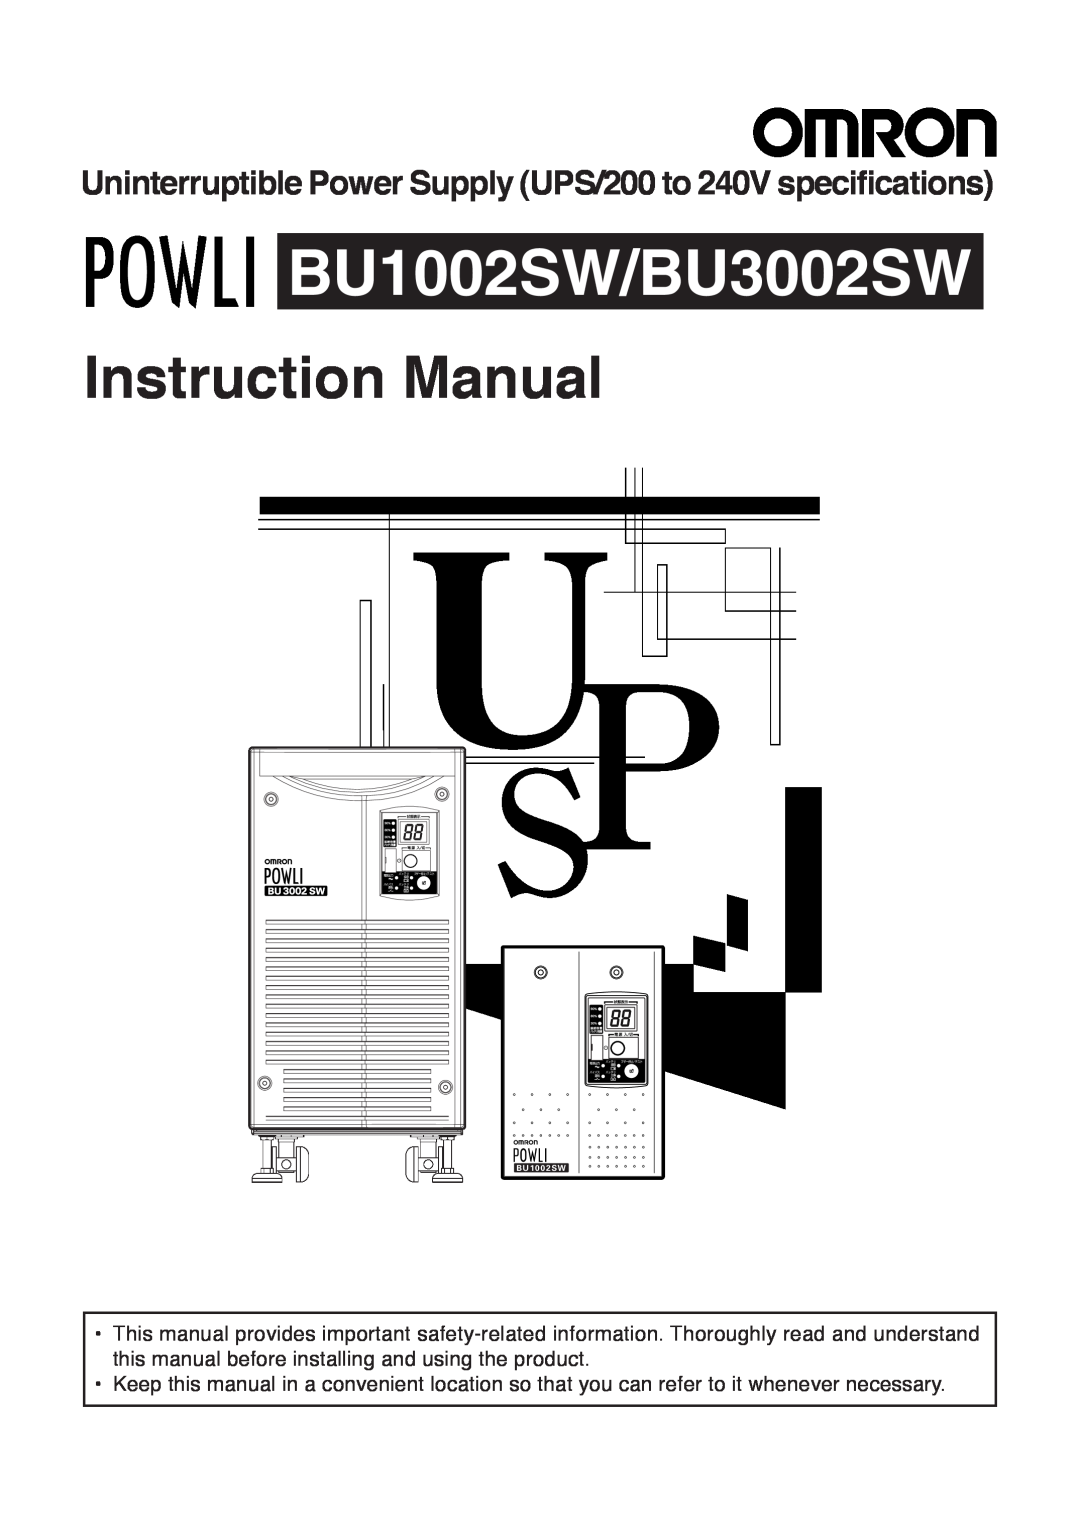 Omron specifications BU1002SW/BU3002SW, Instruction Manual, Uninterruptible Power Supply UPS/200 to 240V specifications 